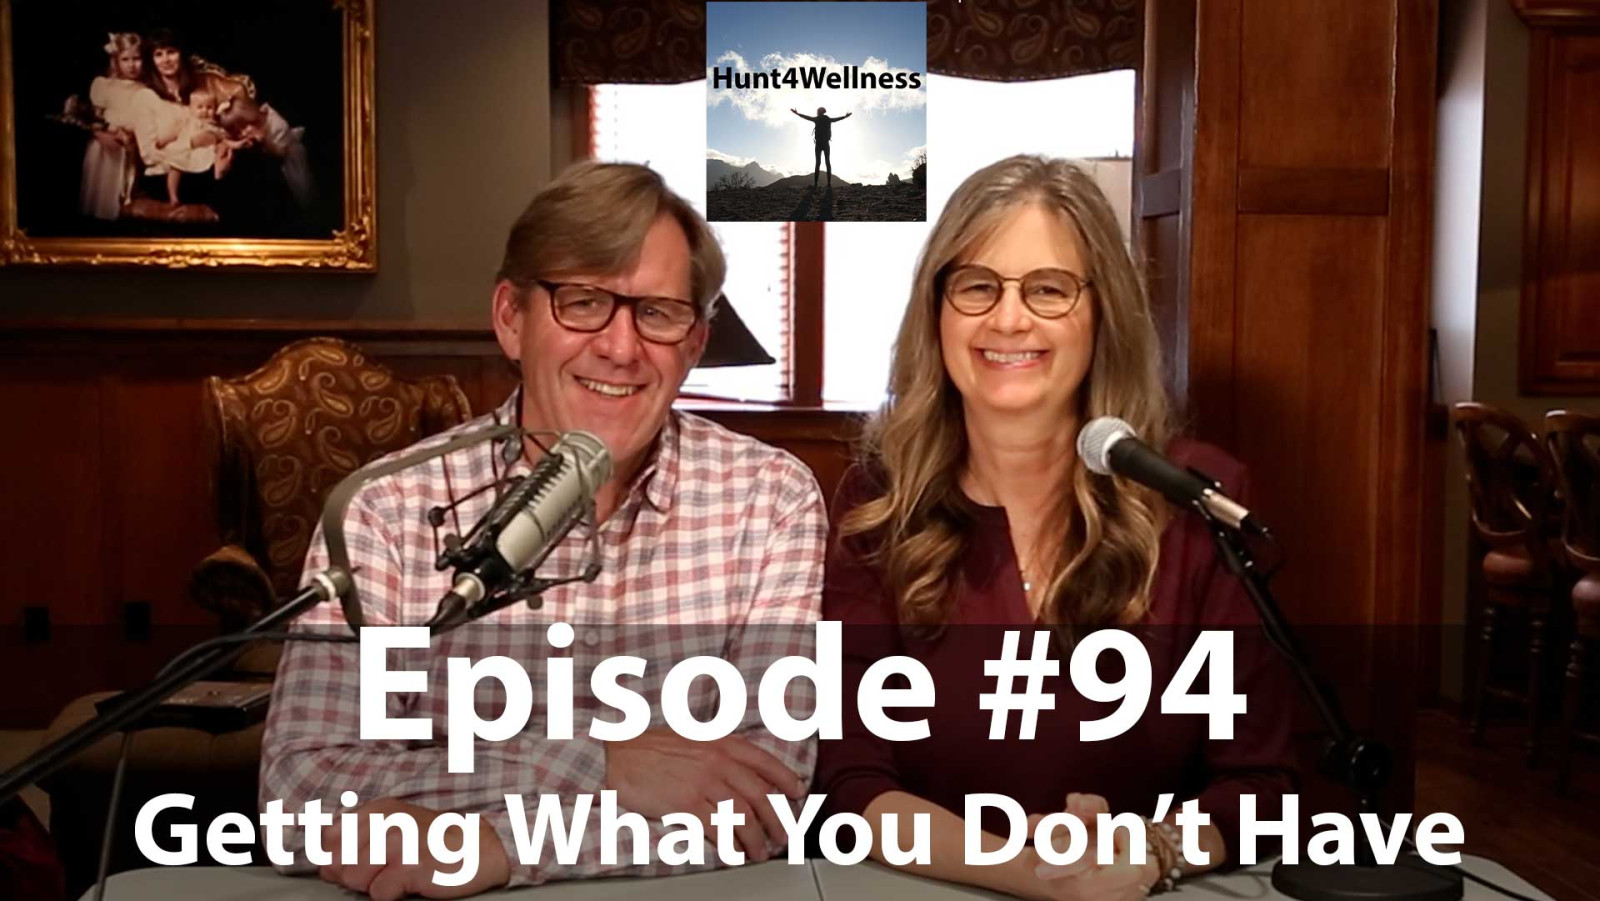 Episode #94 - Getting What You Don't Have